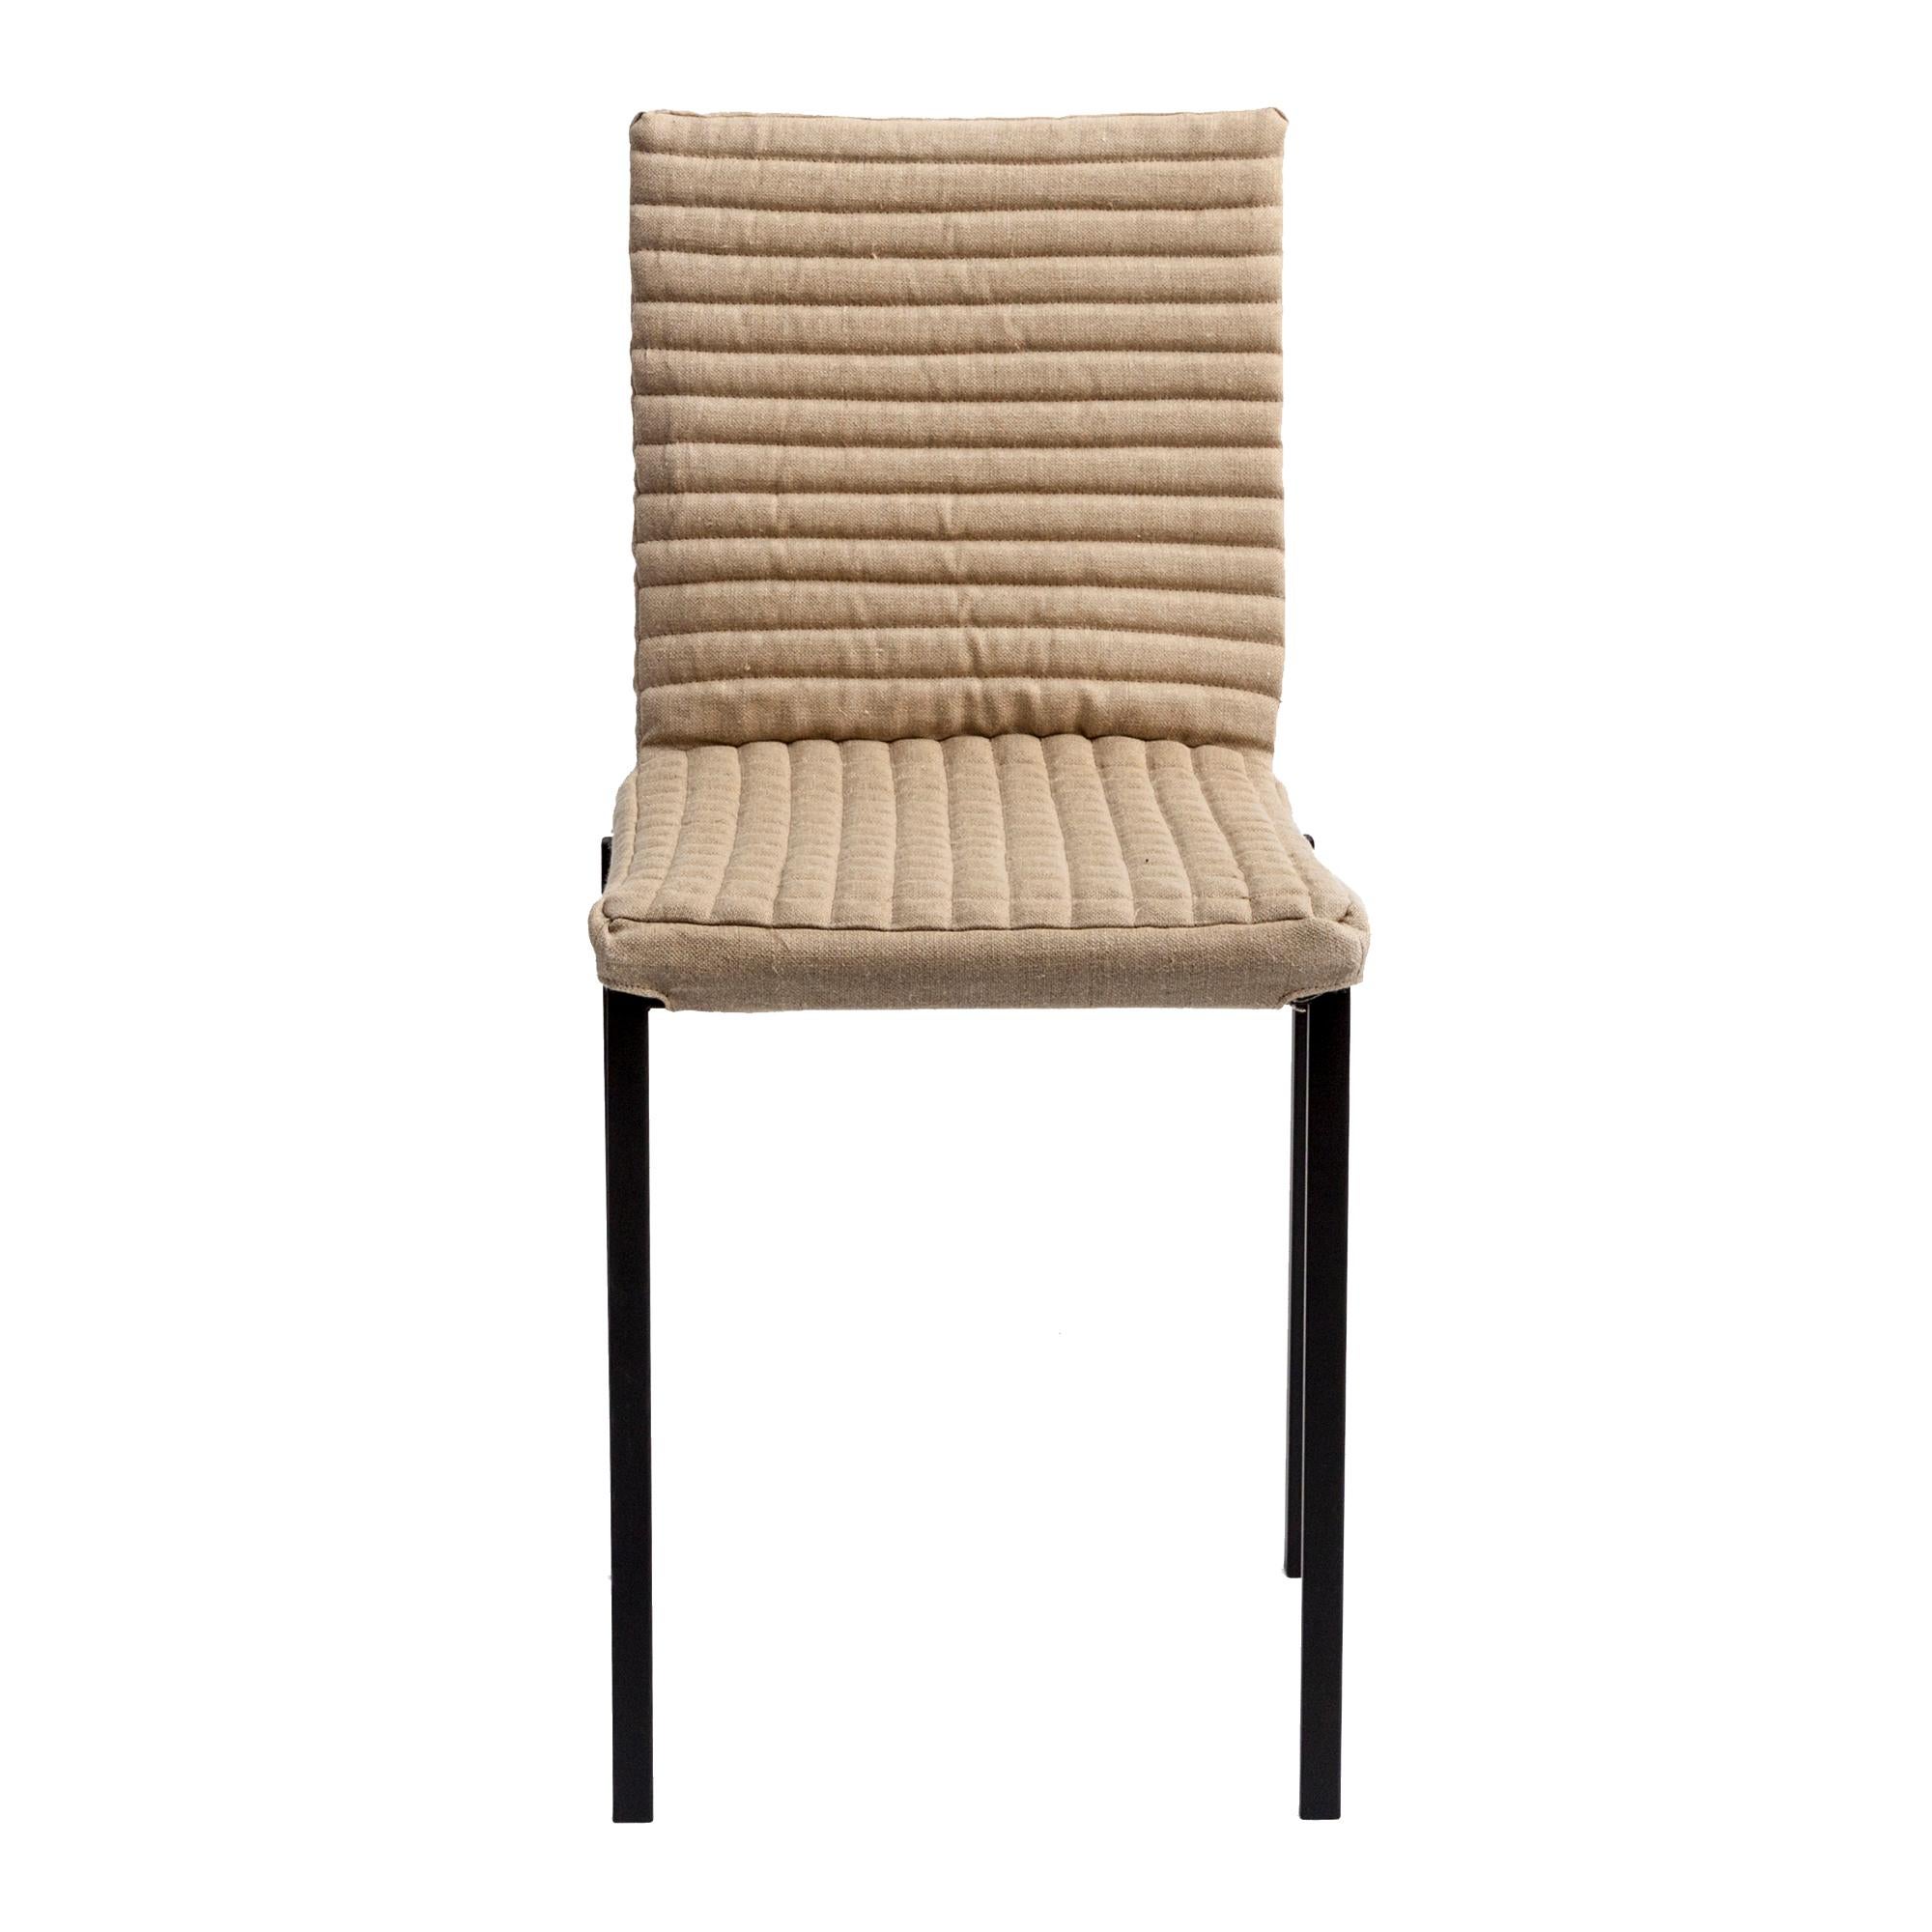 Contemporary Tanit Soft Chair with Beige Linen Cover For Sale